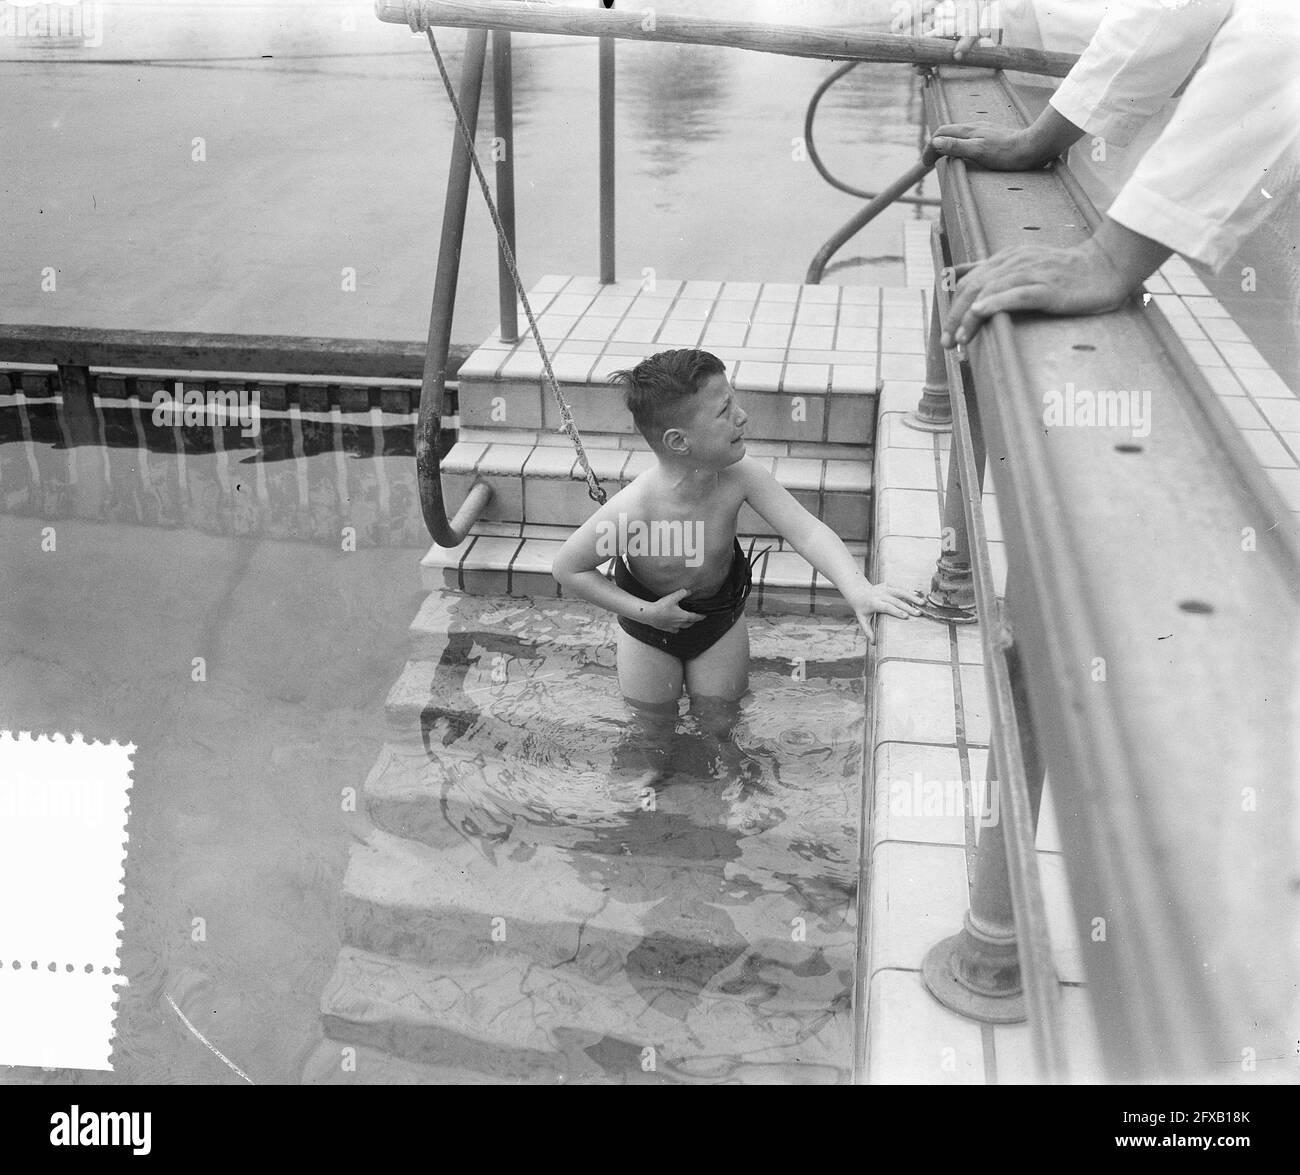 First pupil in Jan Van Galenbad (Rob Jansen, age 8). Lesson with the running rod, May 17, 1953, pupils, swimming pools, swimming lessons, swimming, The Netherlands, 20th century press agency photo, news to remember, documentary, historic photography 1945-1990, visual stories, human history of the Twentieth Century, capturing moments in time Stock Photo